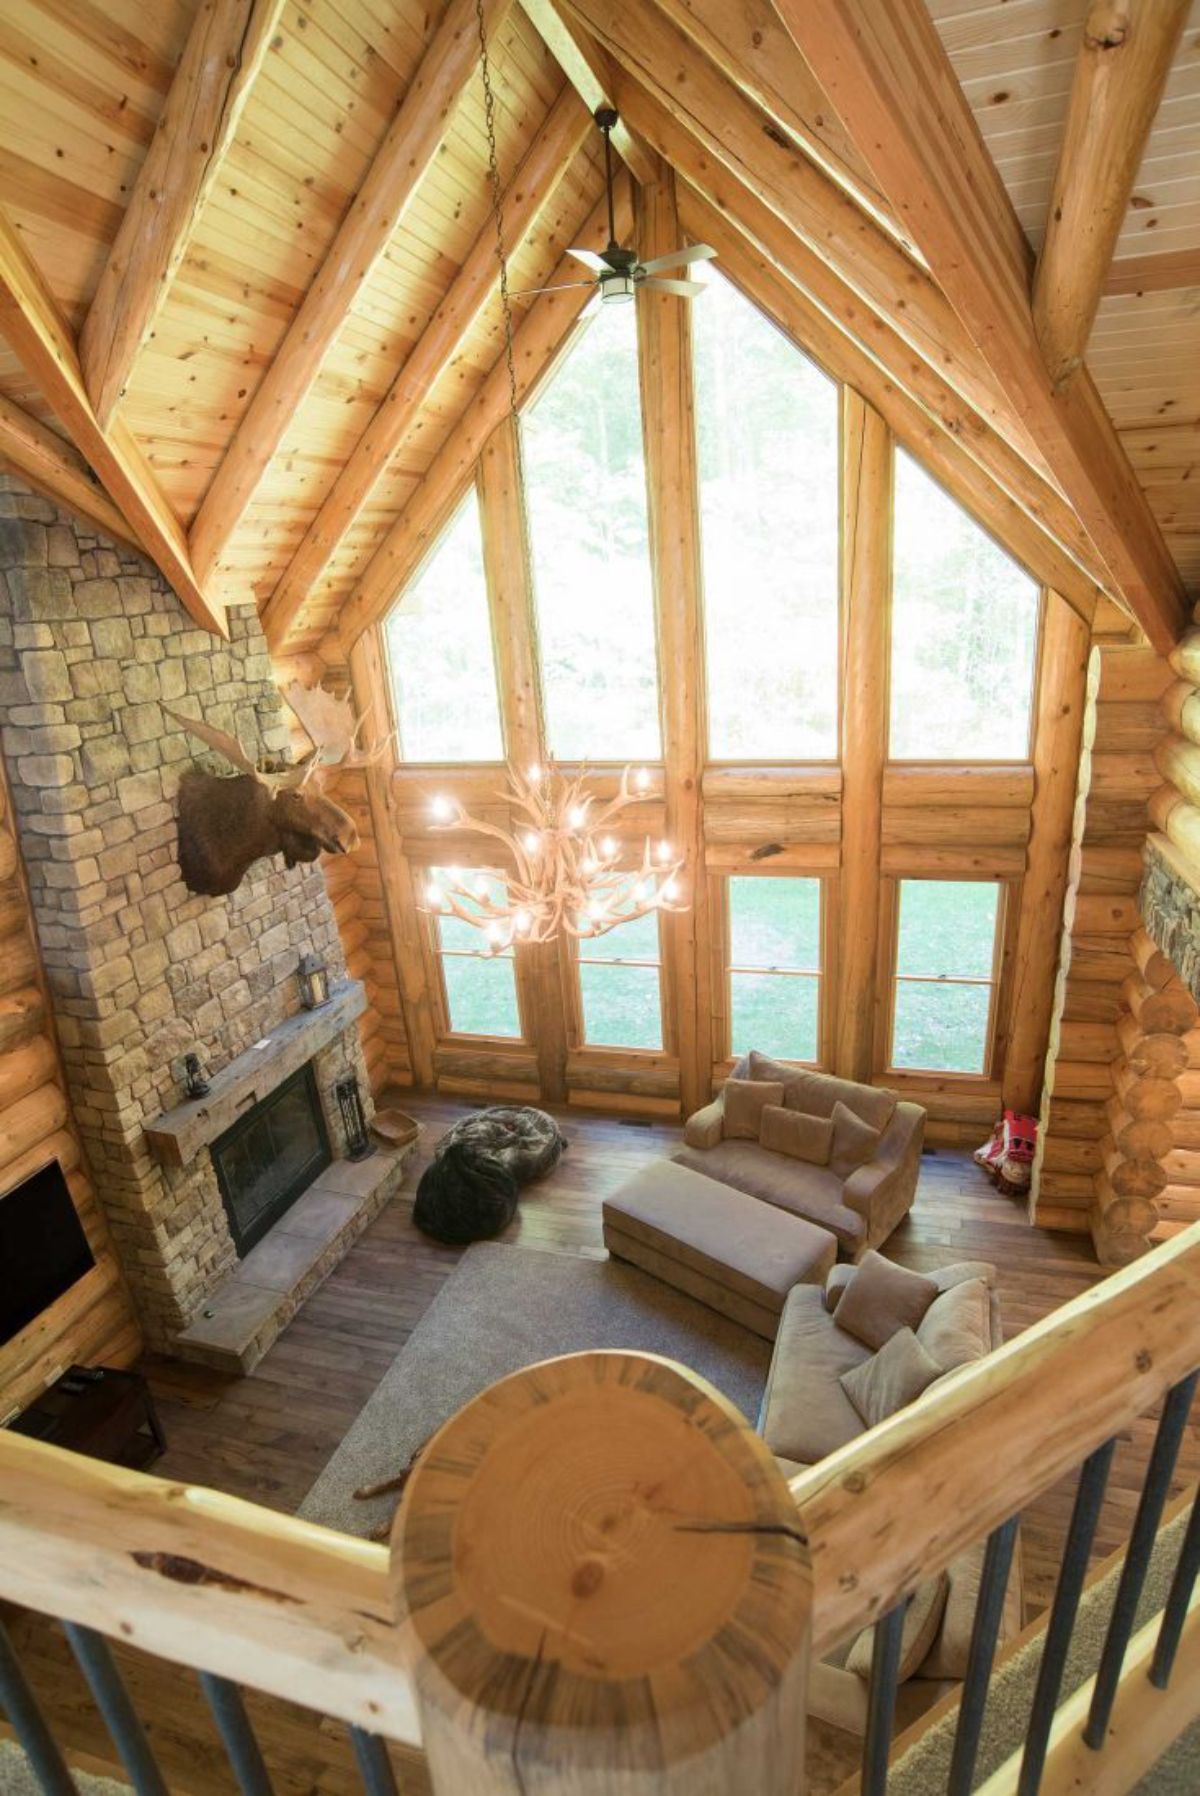 view from loft into main floor living space of log cabin